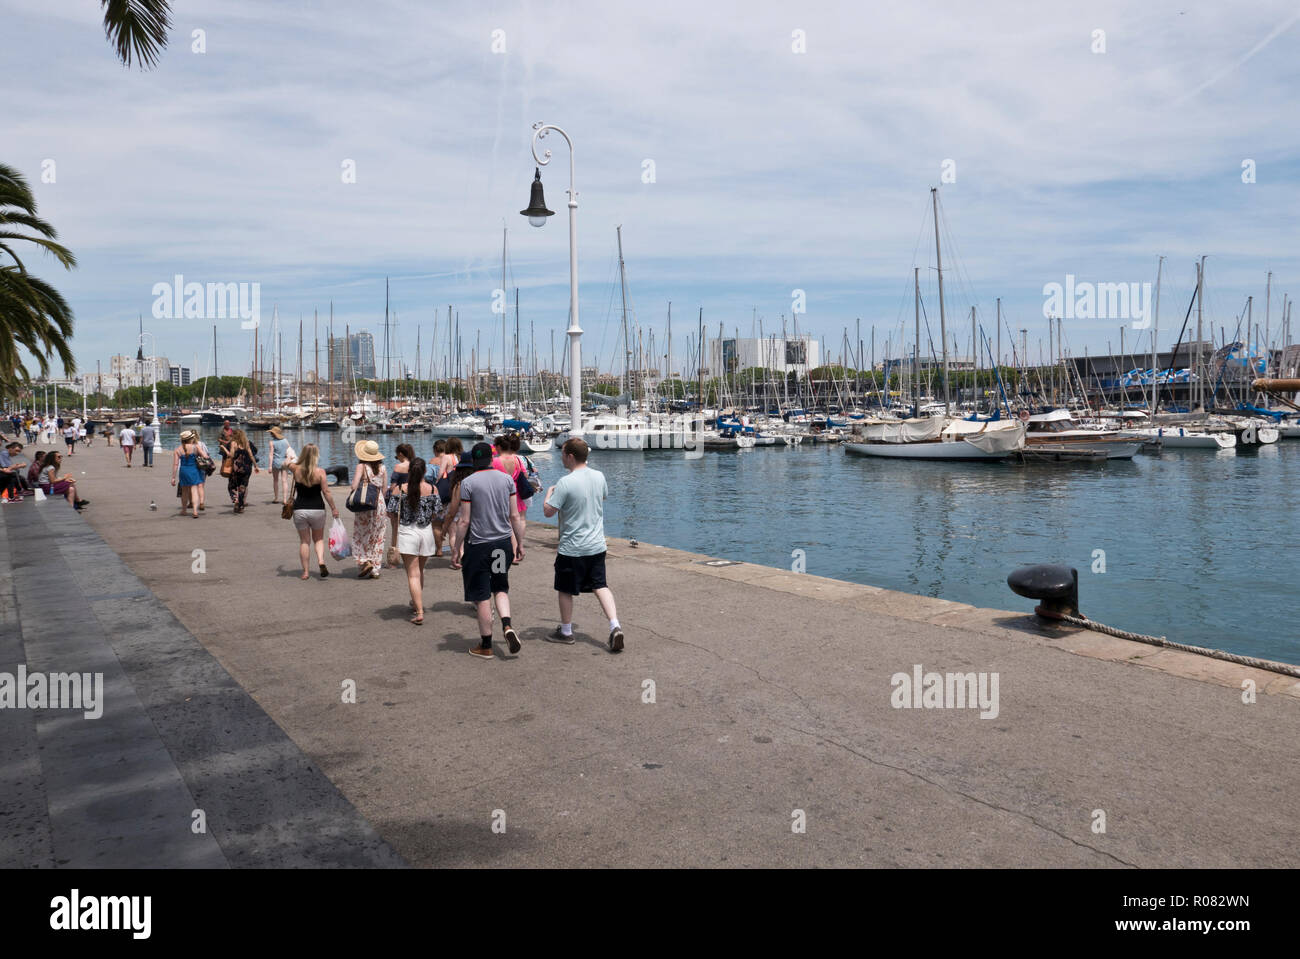 People walking along the promonade by the harbour in Barcelona, Spain Stock Photo